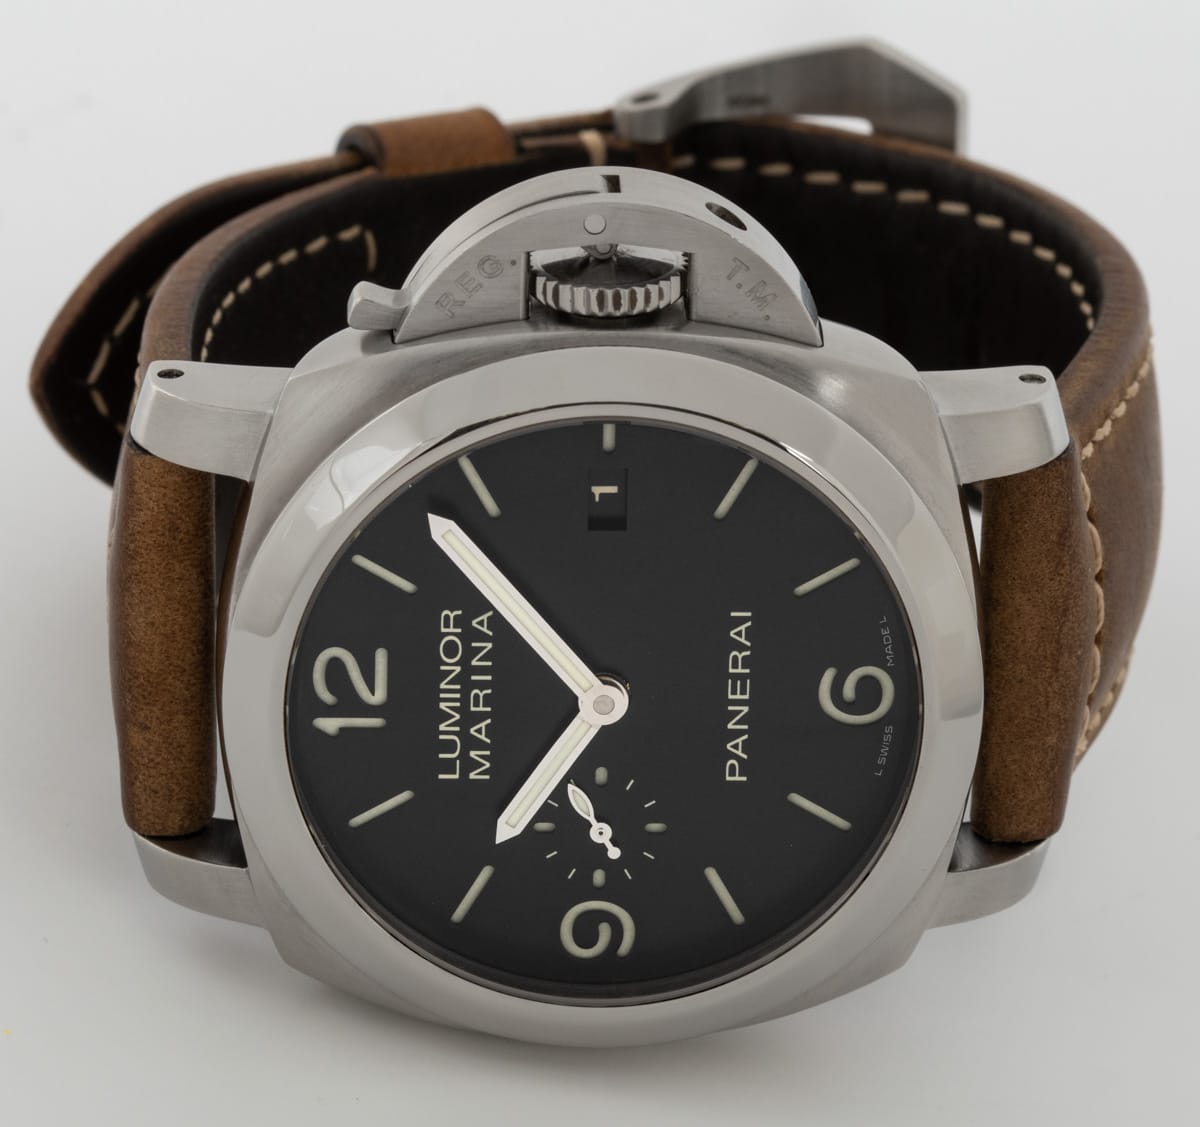 Front View of Luminor 1950 3 Days Automatic